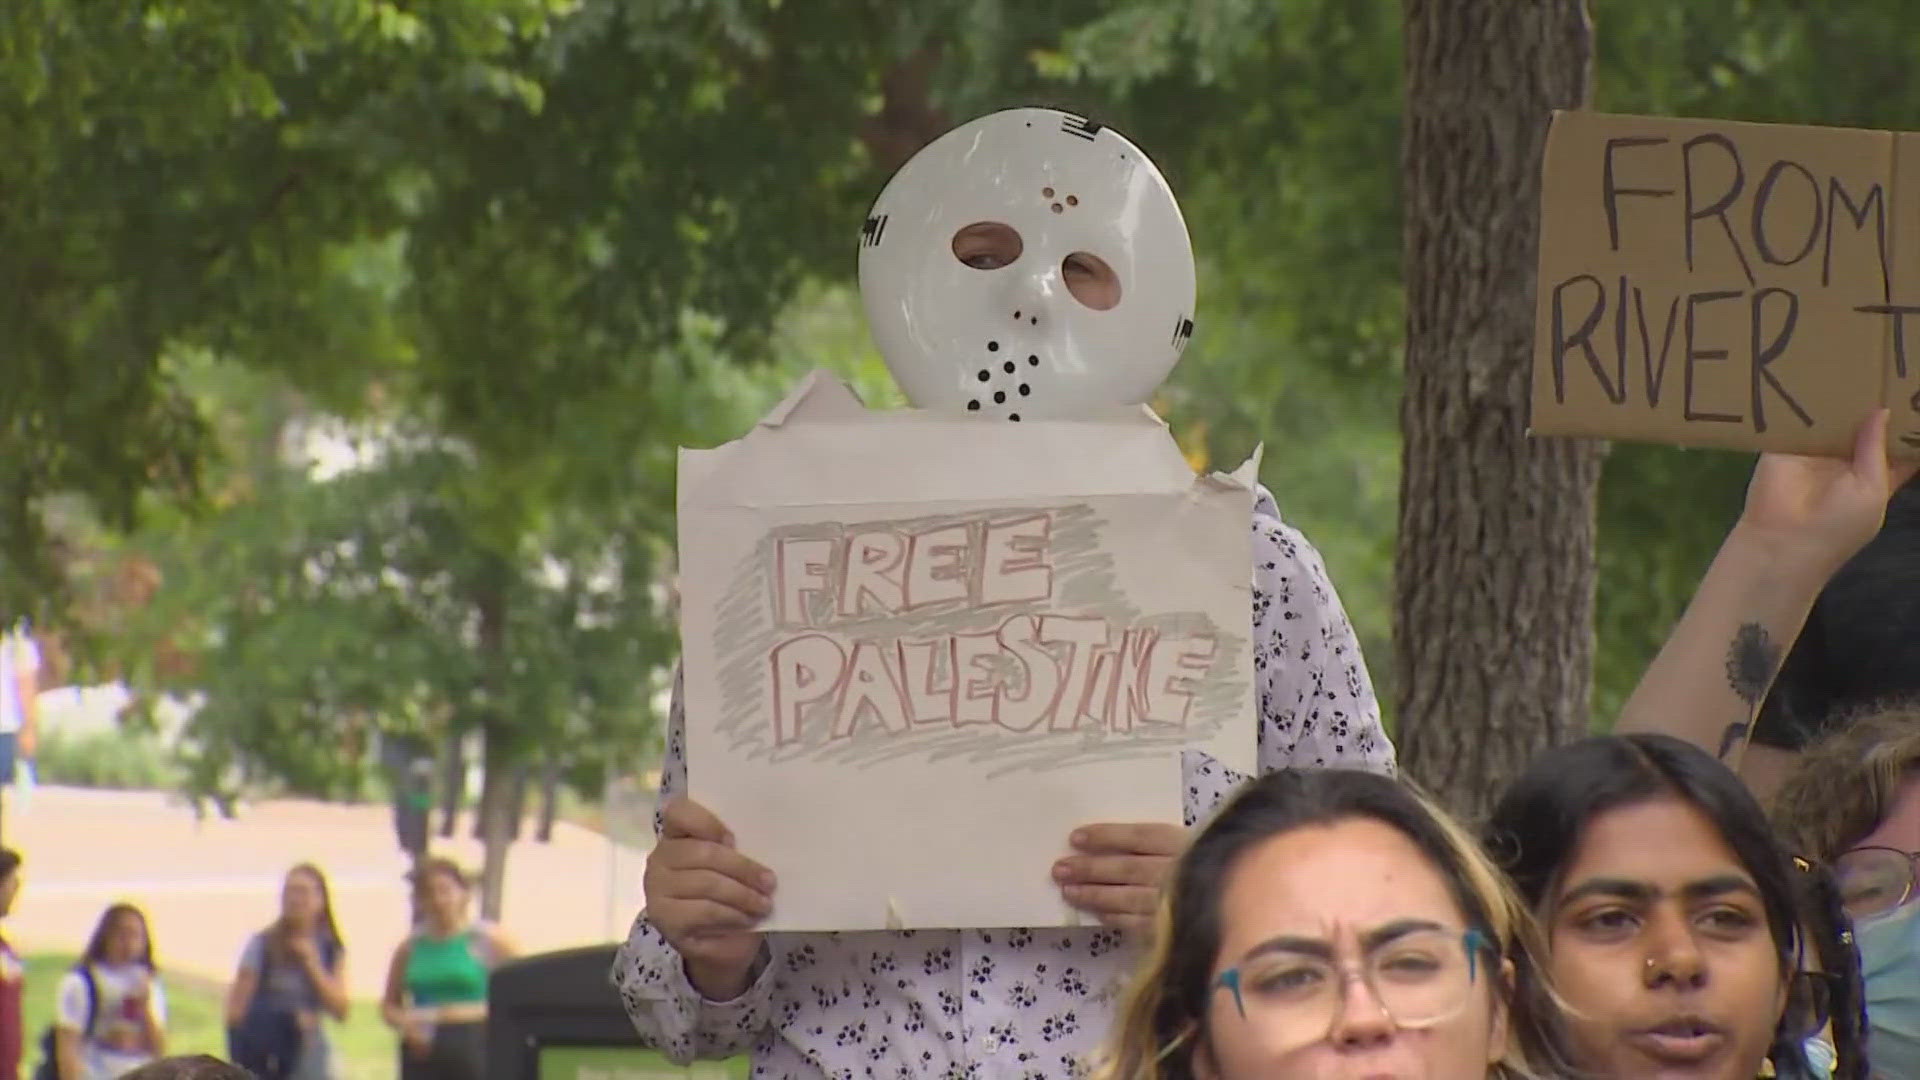 Some of the pro-Palestine demonstrations are escalating in intensity, and now the protests have spread to North Texas.